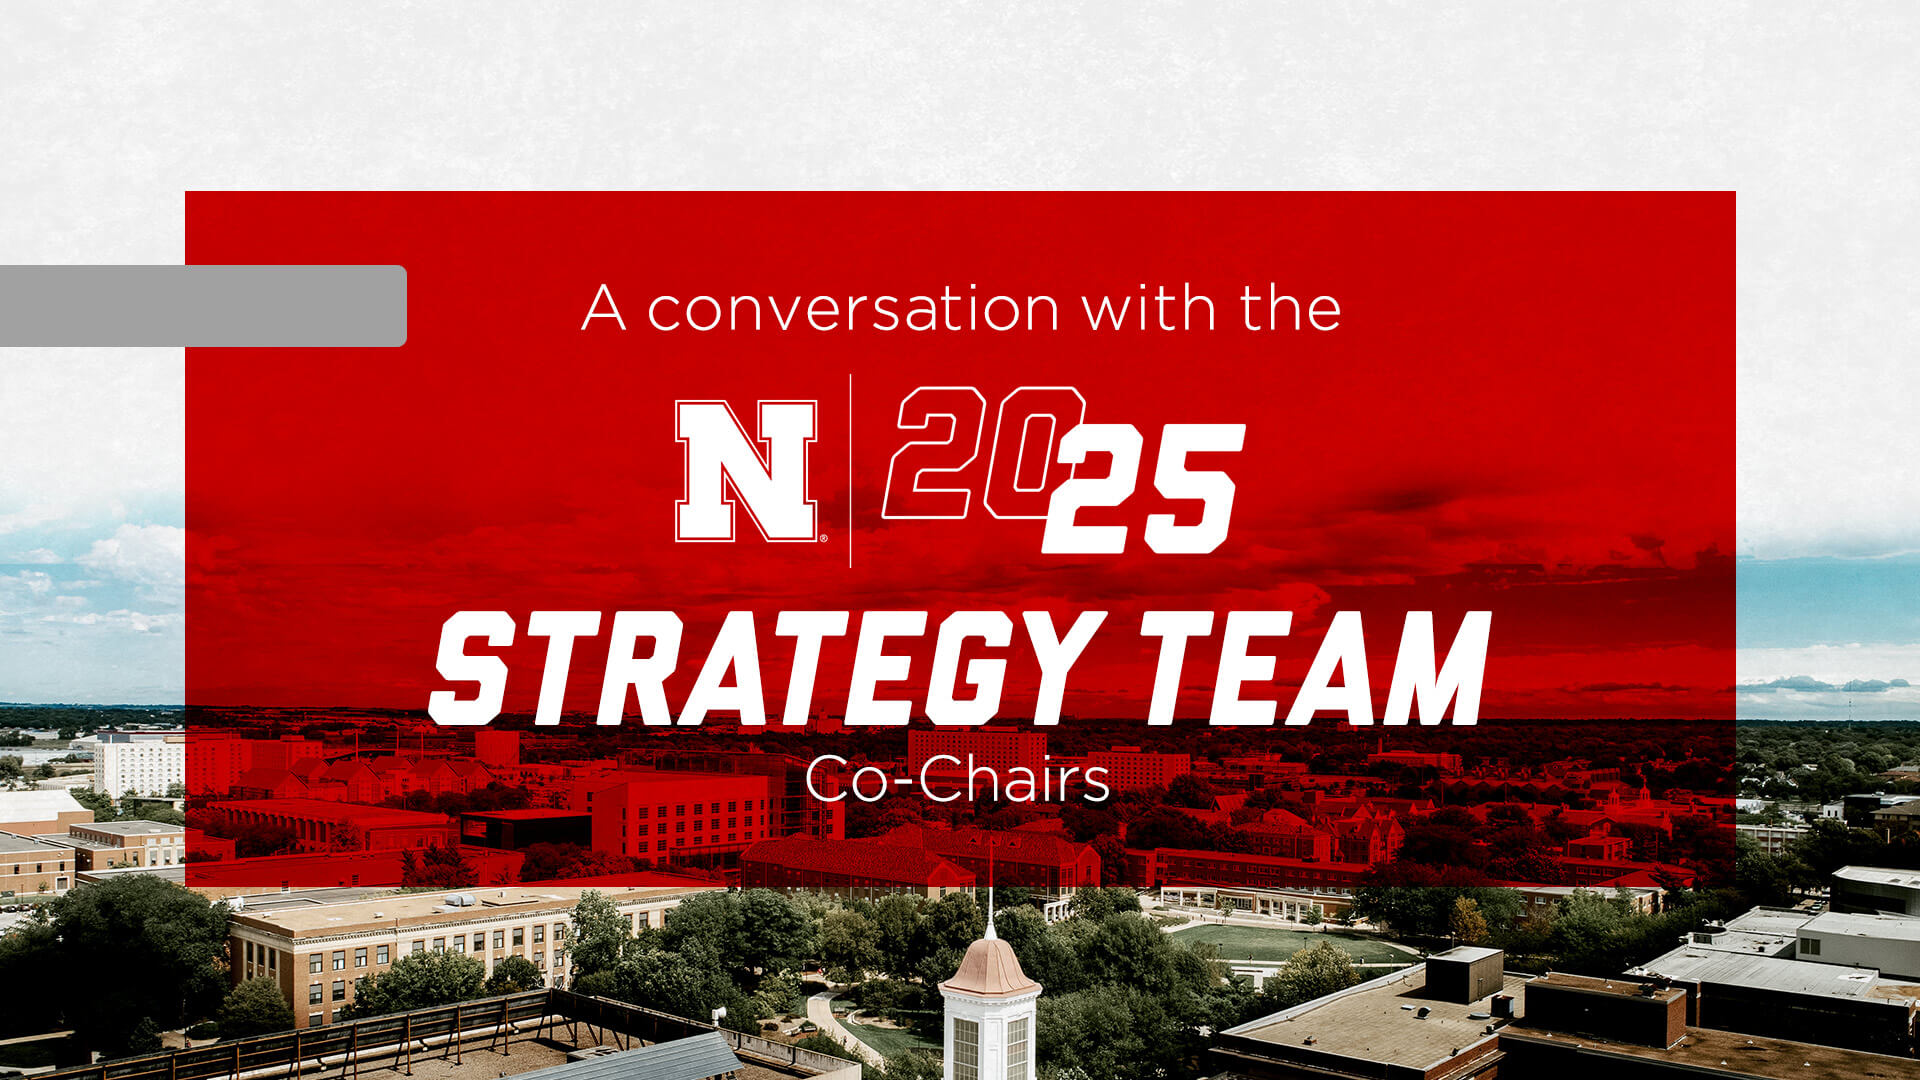 A Conversation with the N|2025 Strategy Team Co-Chairs | MediaHub